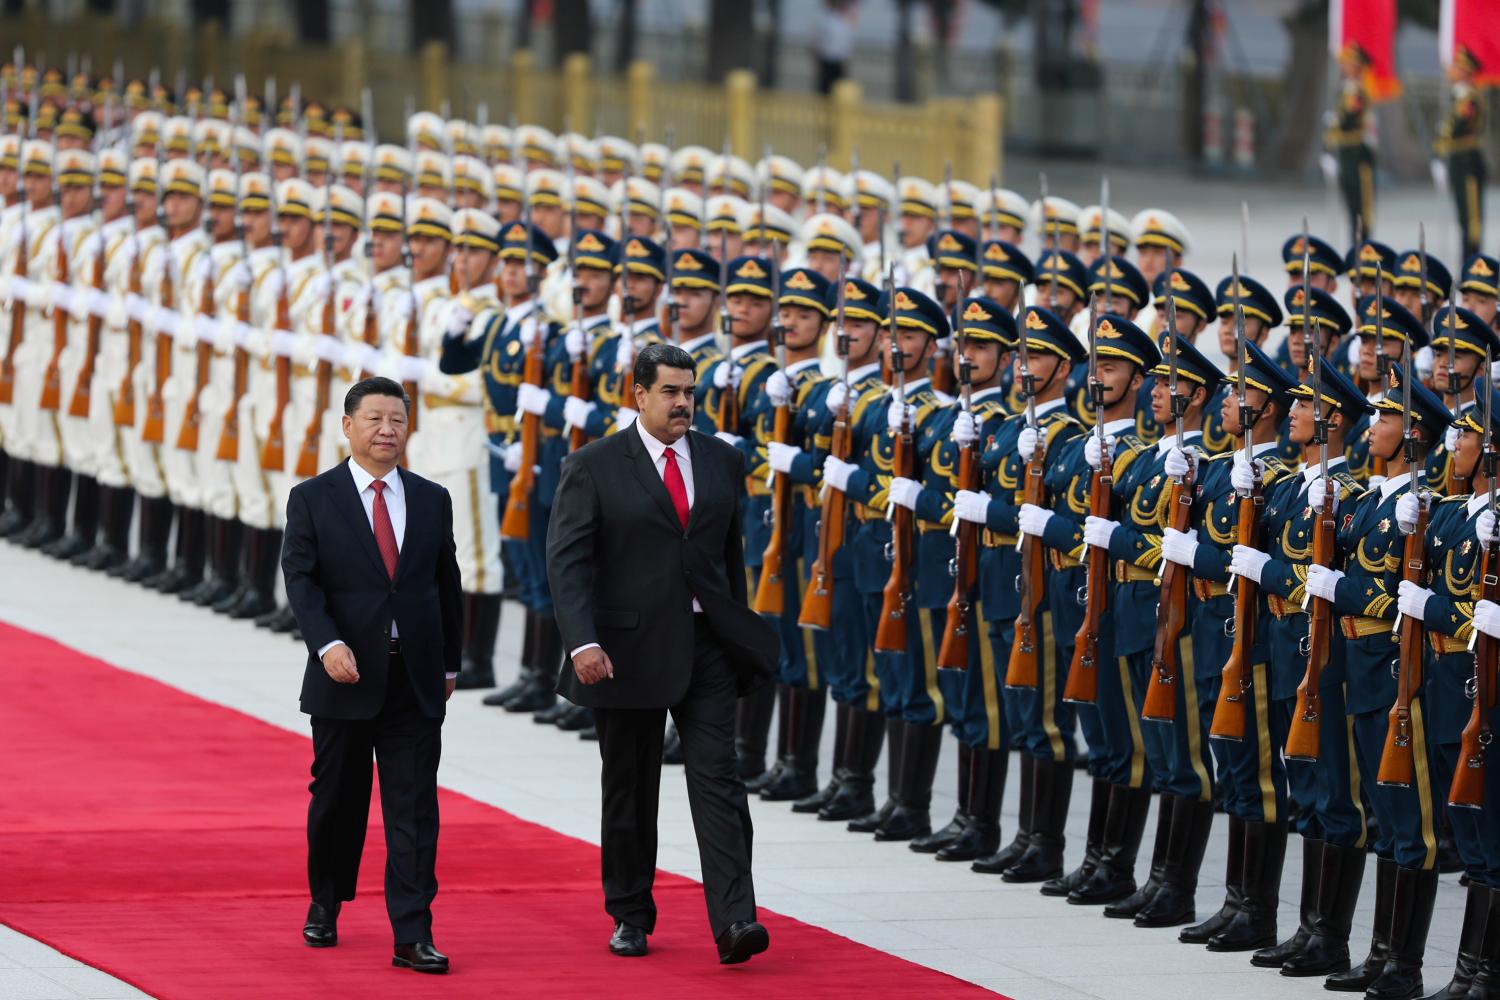 Chinese President Xi Jinping walks next to Venezuela's President Nicolas Maduro during his welcoming ceremony in Beijing, China September 14, 2018. Miraflores Palace/Handout via REUTERS ATTENTION EDITORS - THIS PICTURE WAS PROVIDED BY A THIRD PARTY